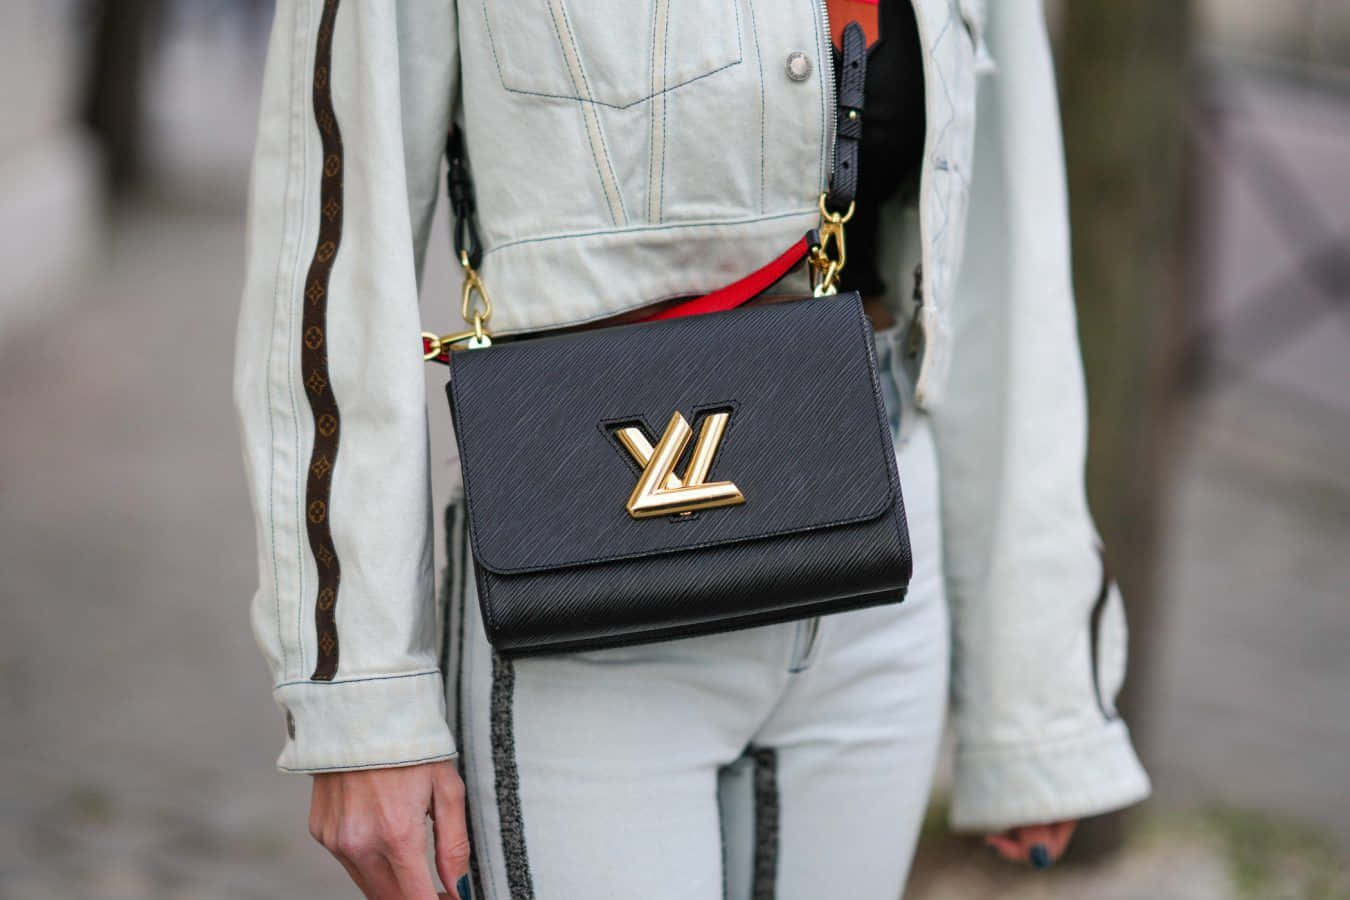 Get Ready For the New Season with the Latest Louis Vuitton Styles